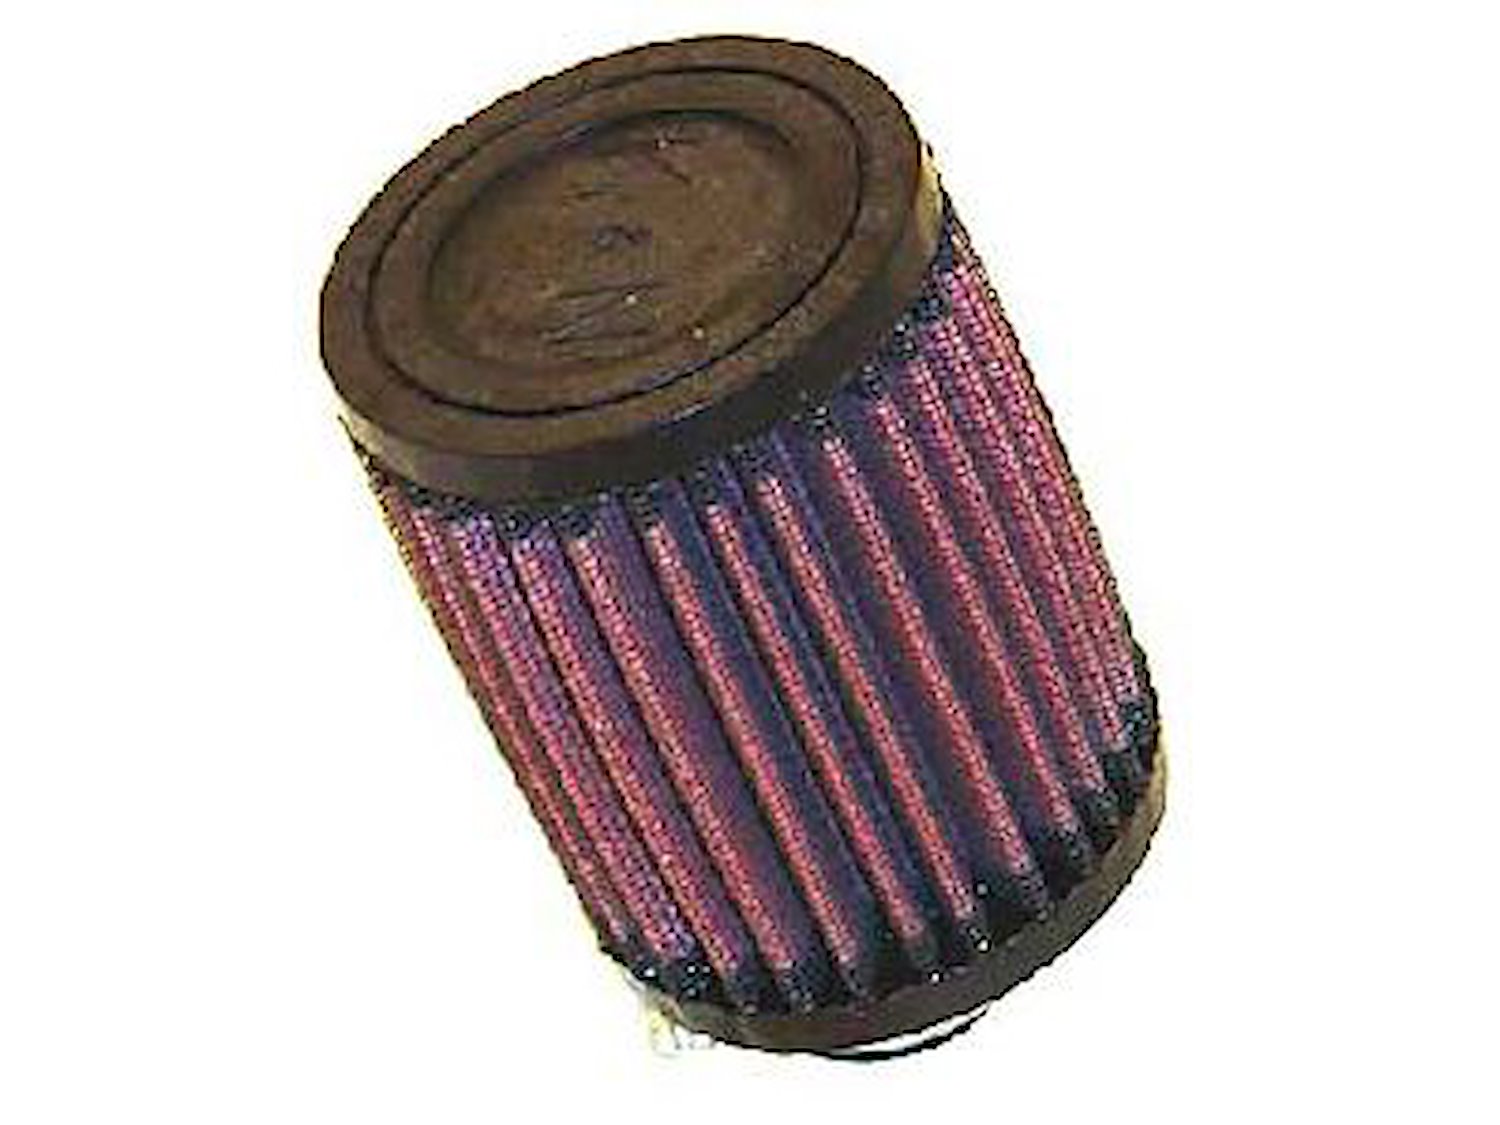 Round Straight Air Filter Flange Dia. (F): 1.25" (32 mm)